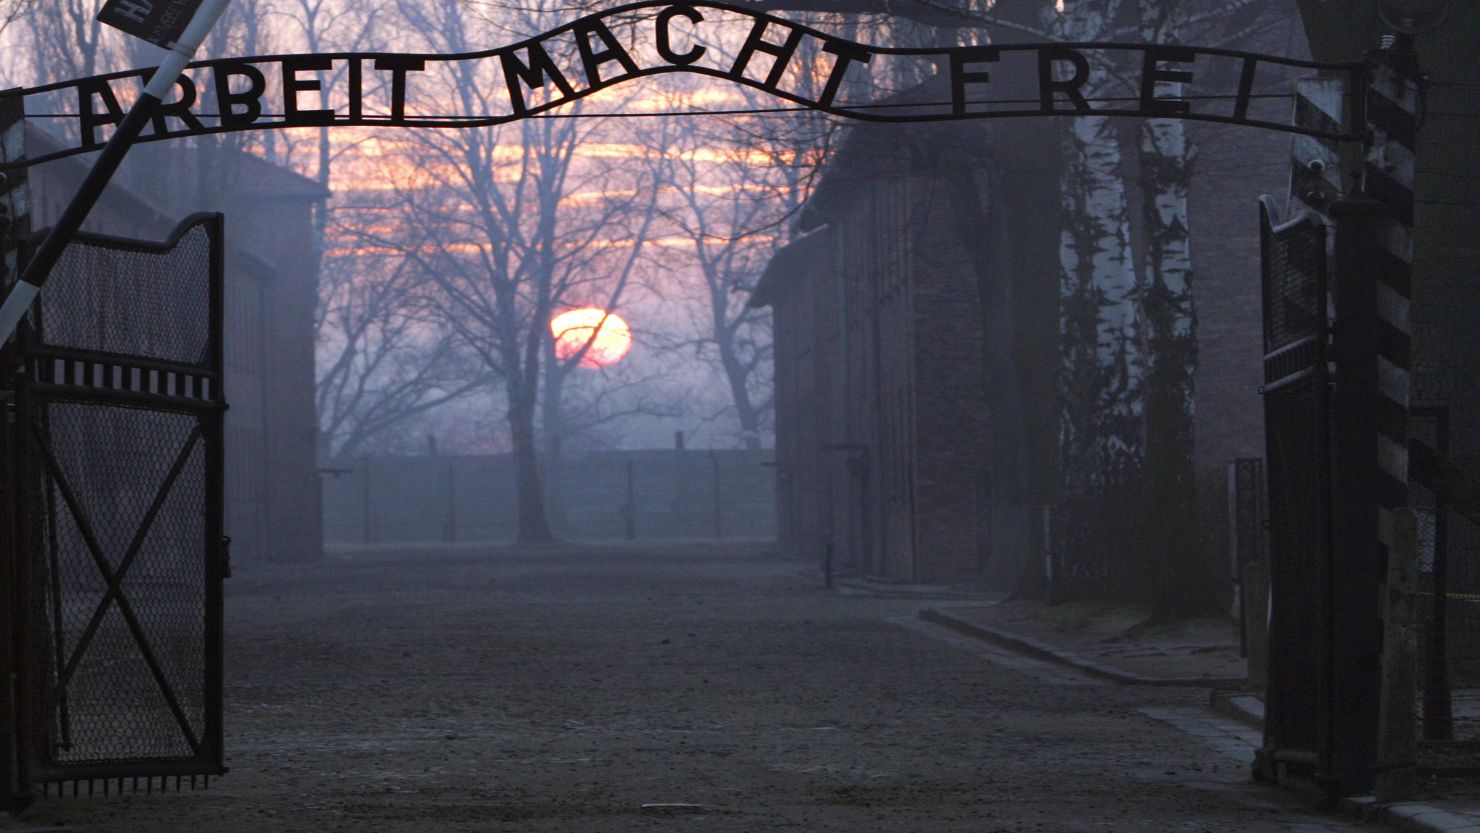 At least 1.1 million Jews, Poles, gay and disabled people, and other persecuted minorities were killed at the Auschwitz prison camp.